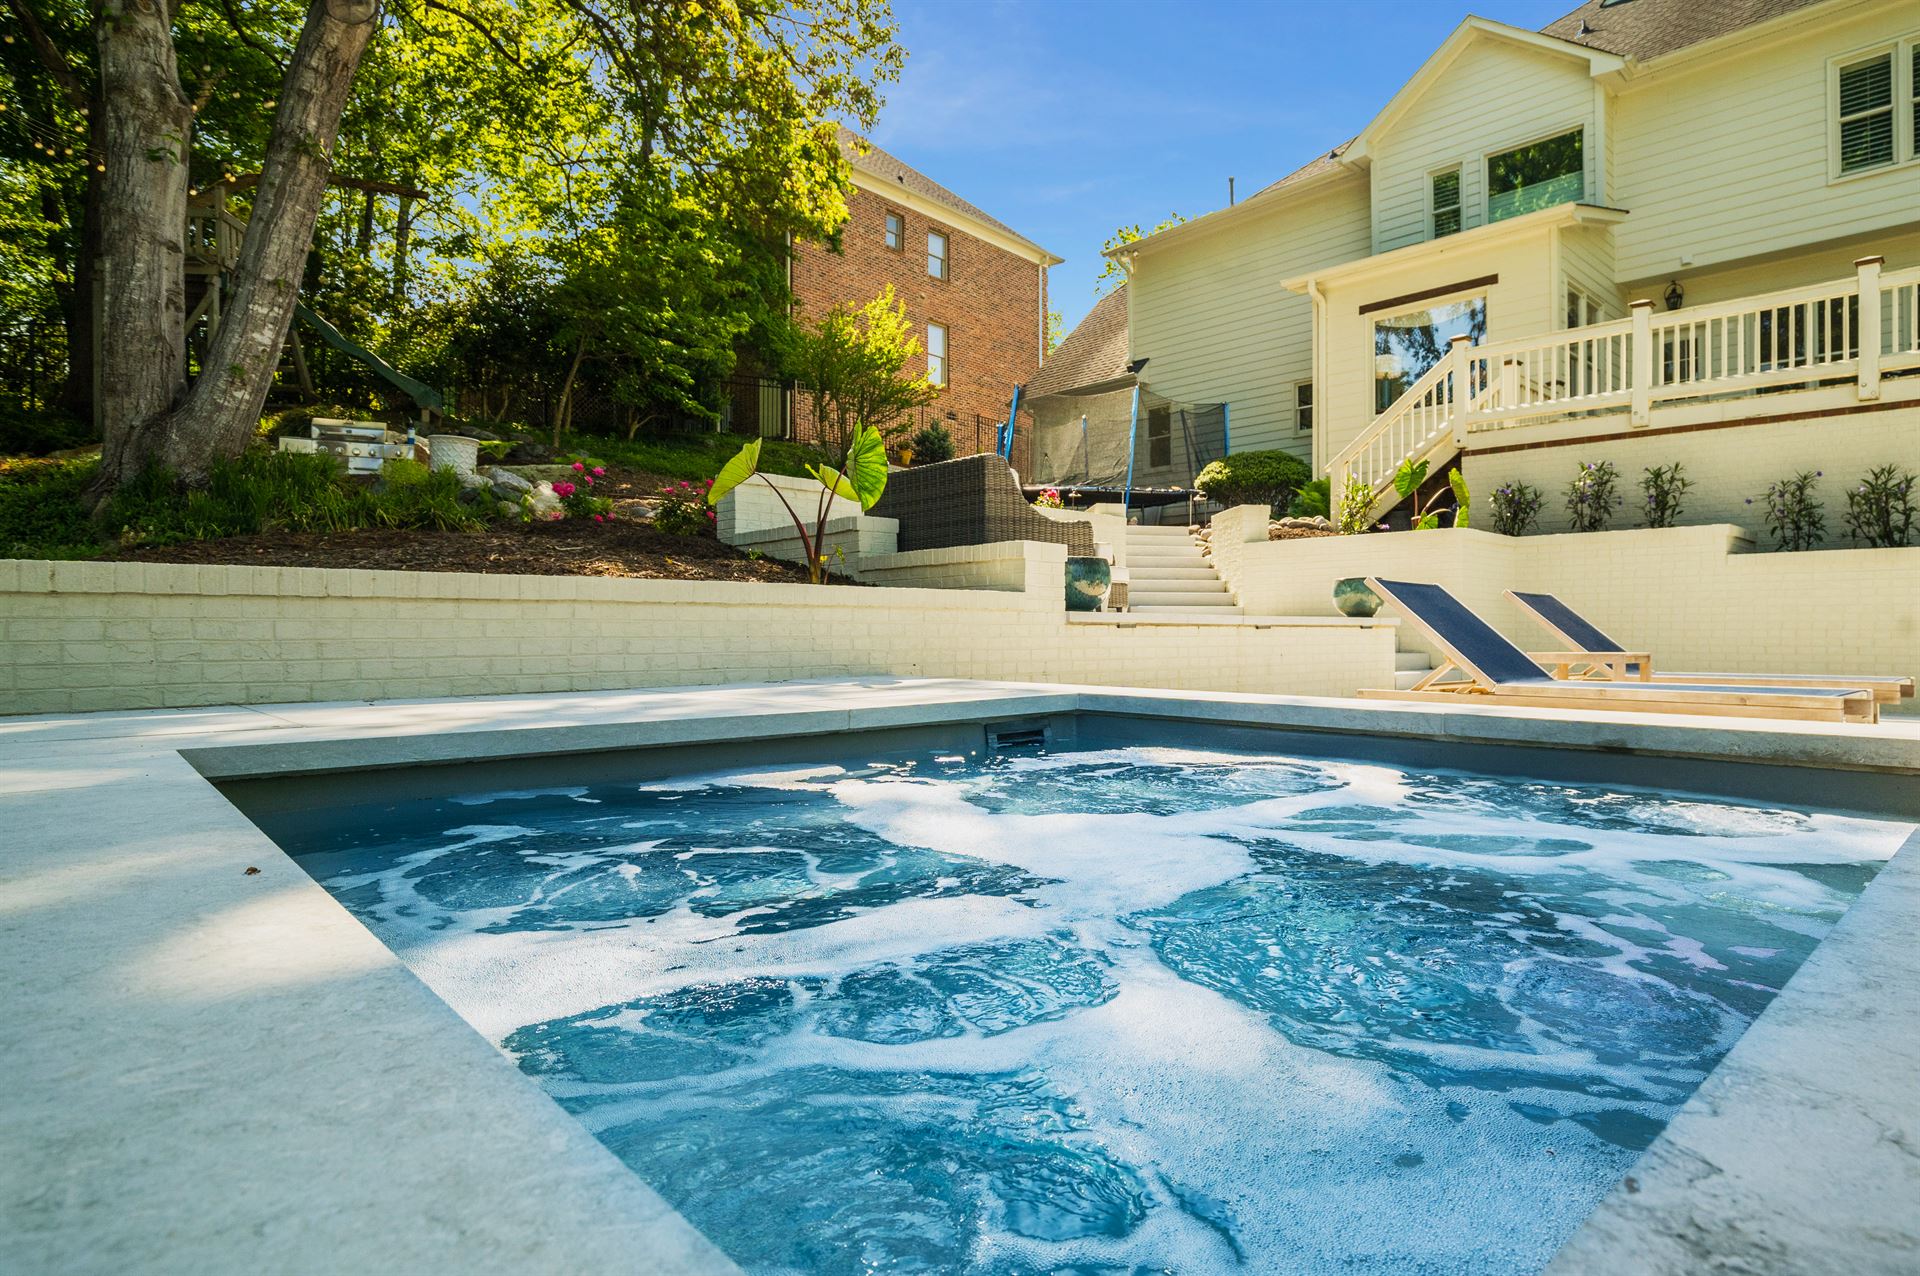 River Pools D40 + SS08 in Diamond with cascades, bubblers, and natural stone patio and coping